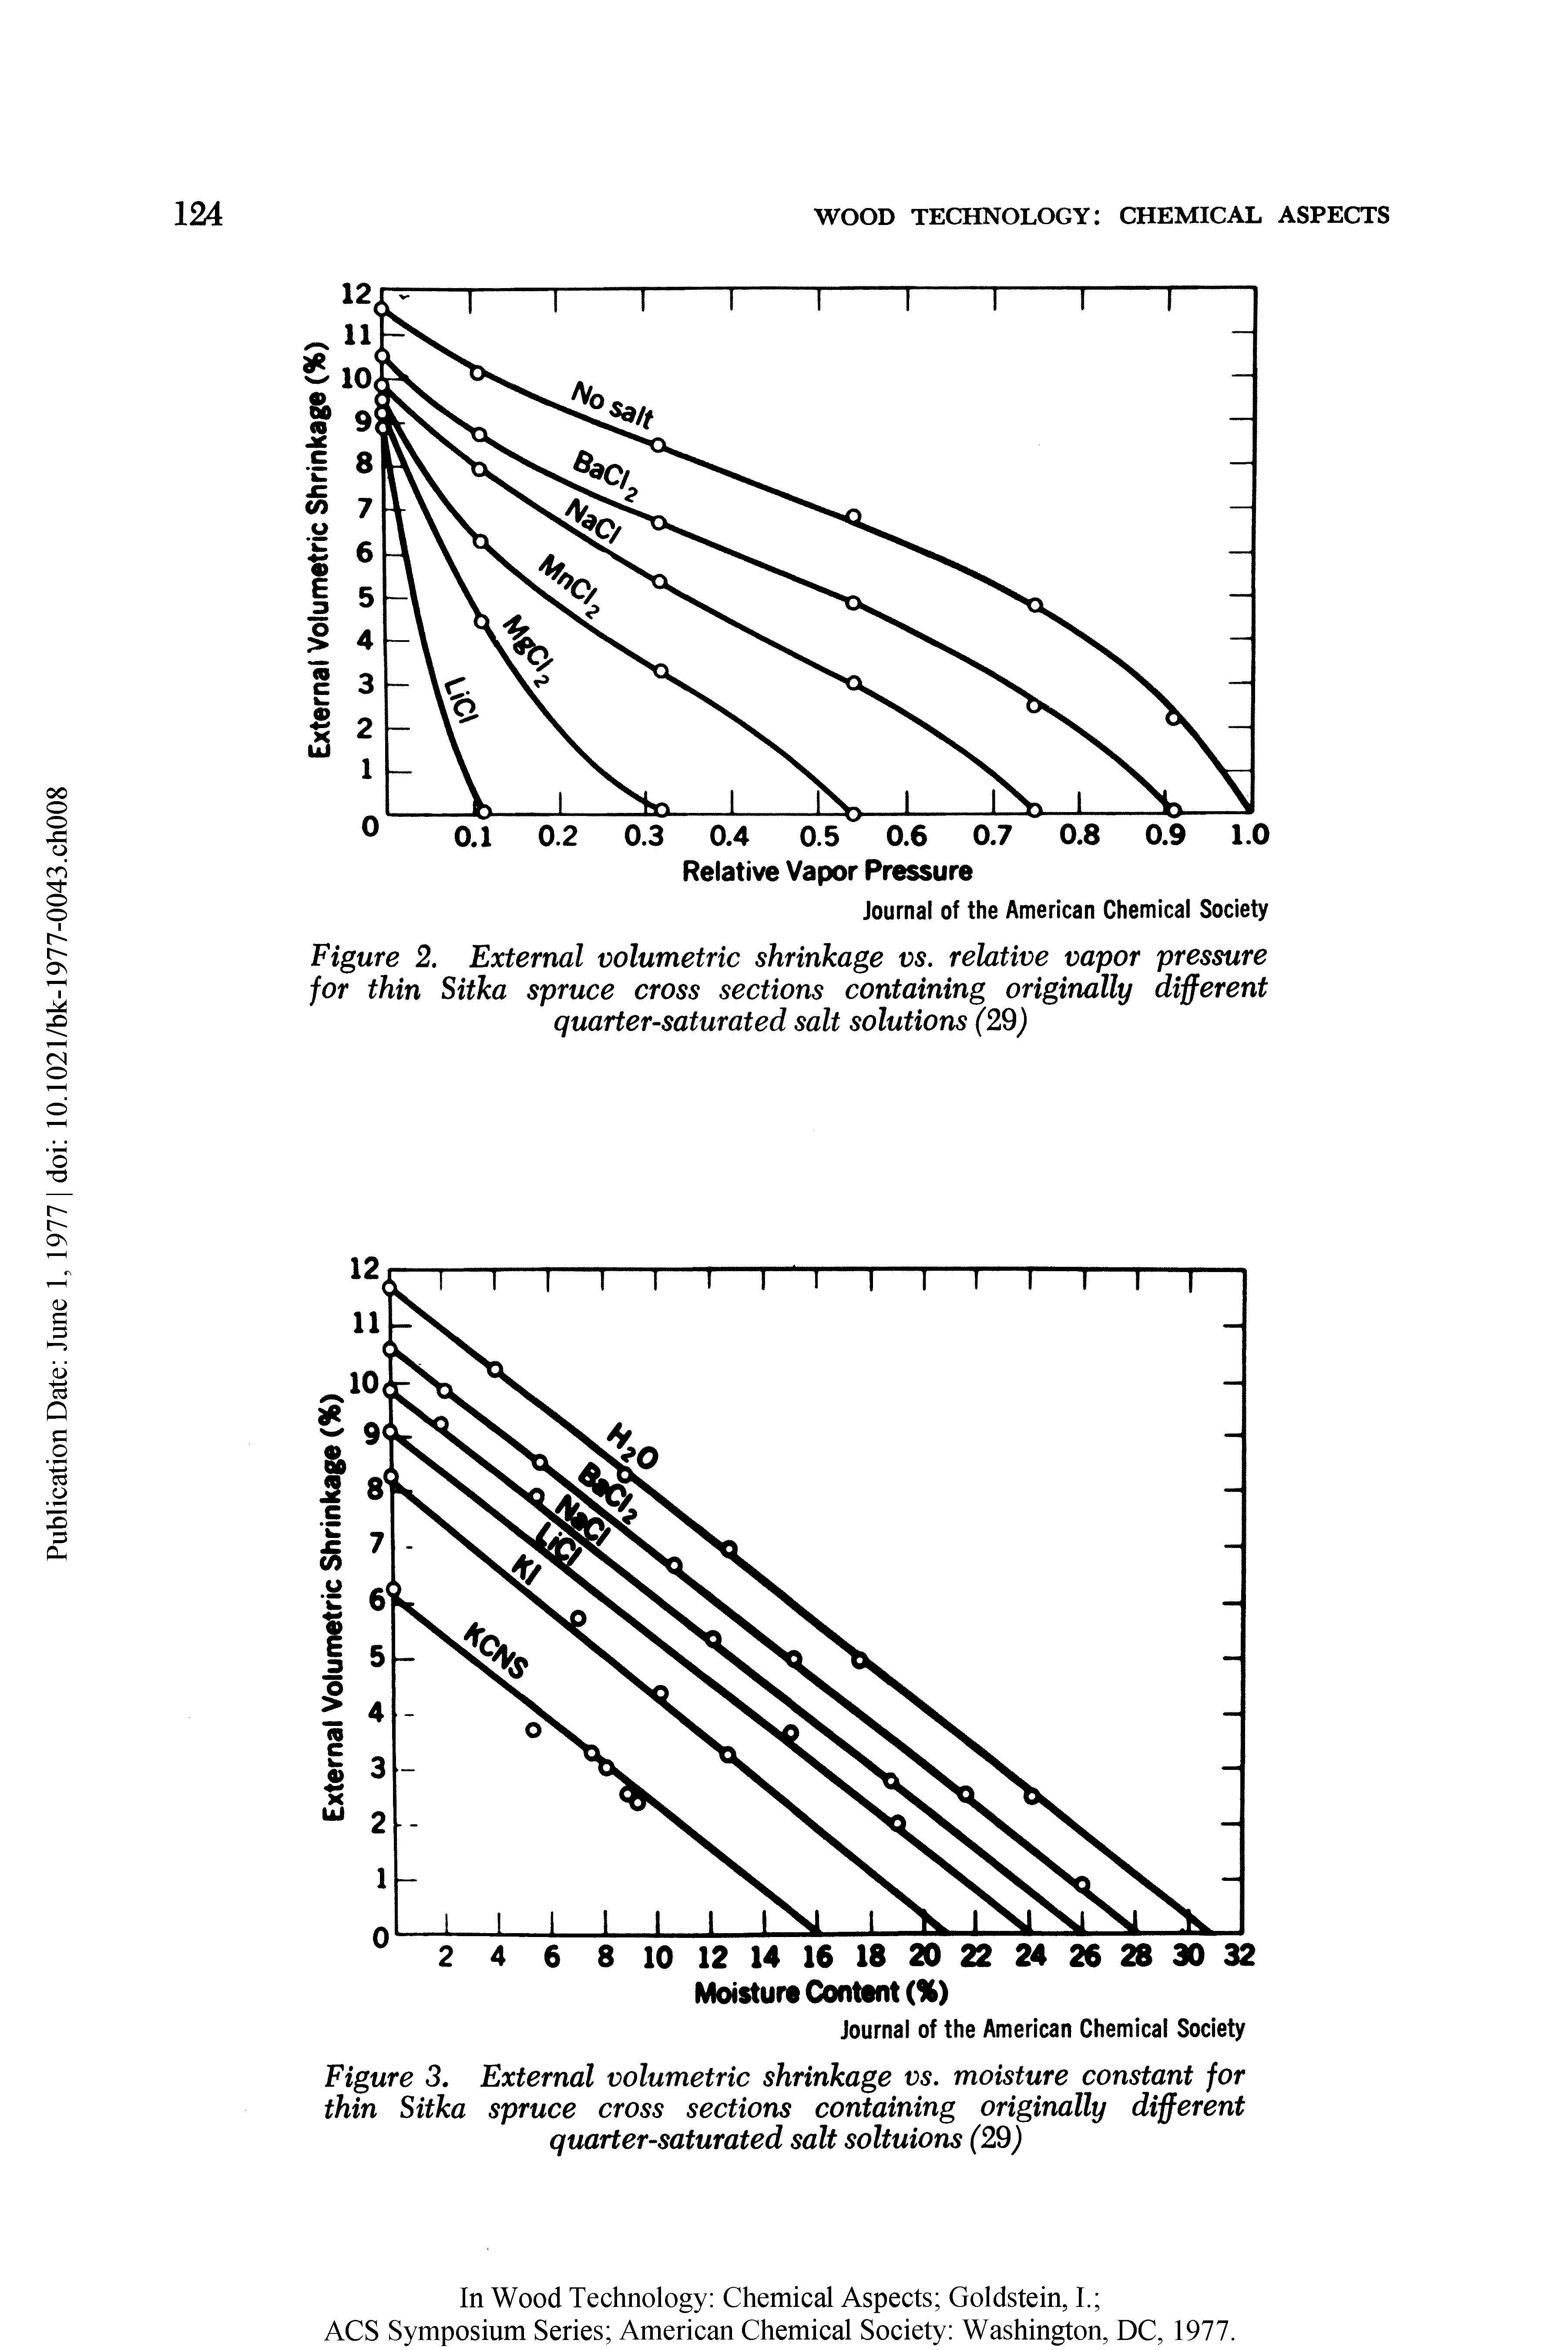 Figure 2. External volumetric shrinkage vs. relative vapor pressure for thin Sitka spruce cross sections containing originally different quarter-saturated salt solutions (29)...